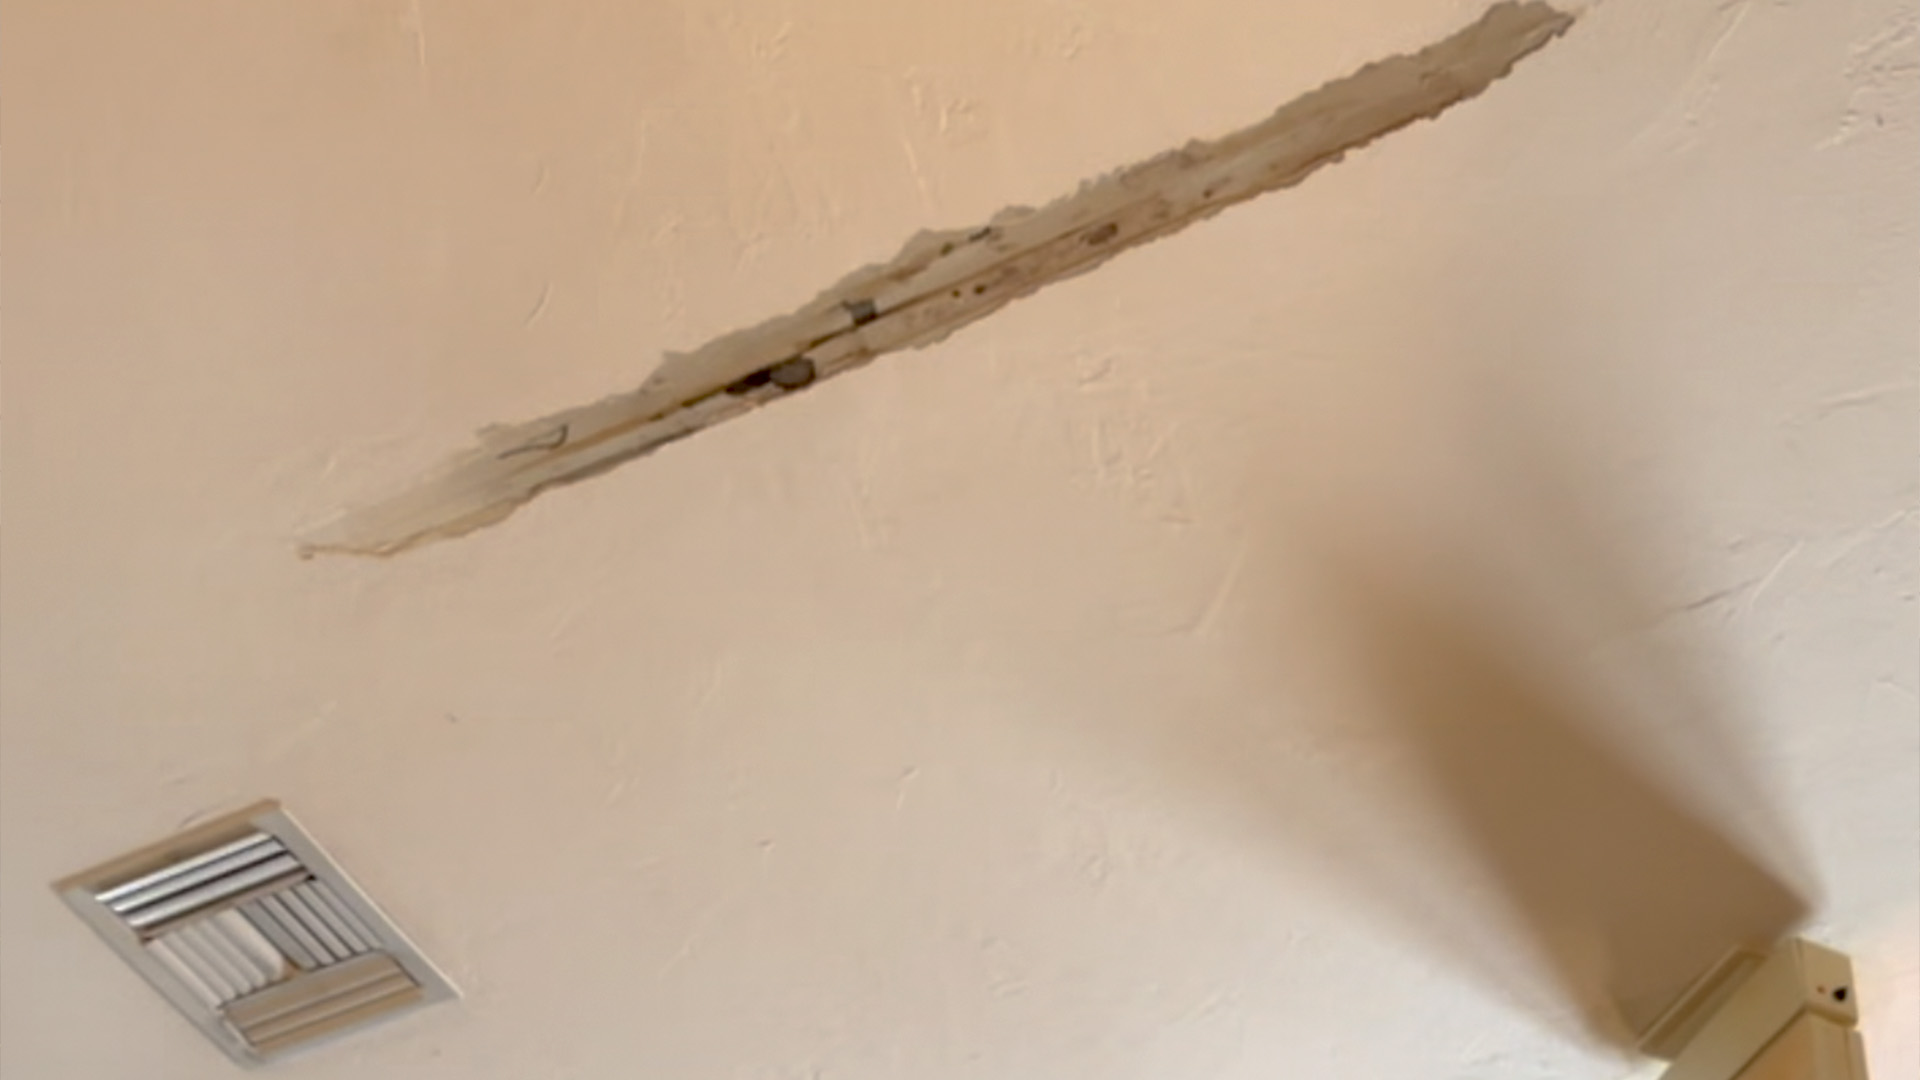 Office Leak in Ceiling After Hurricane Damage